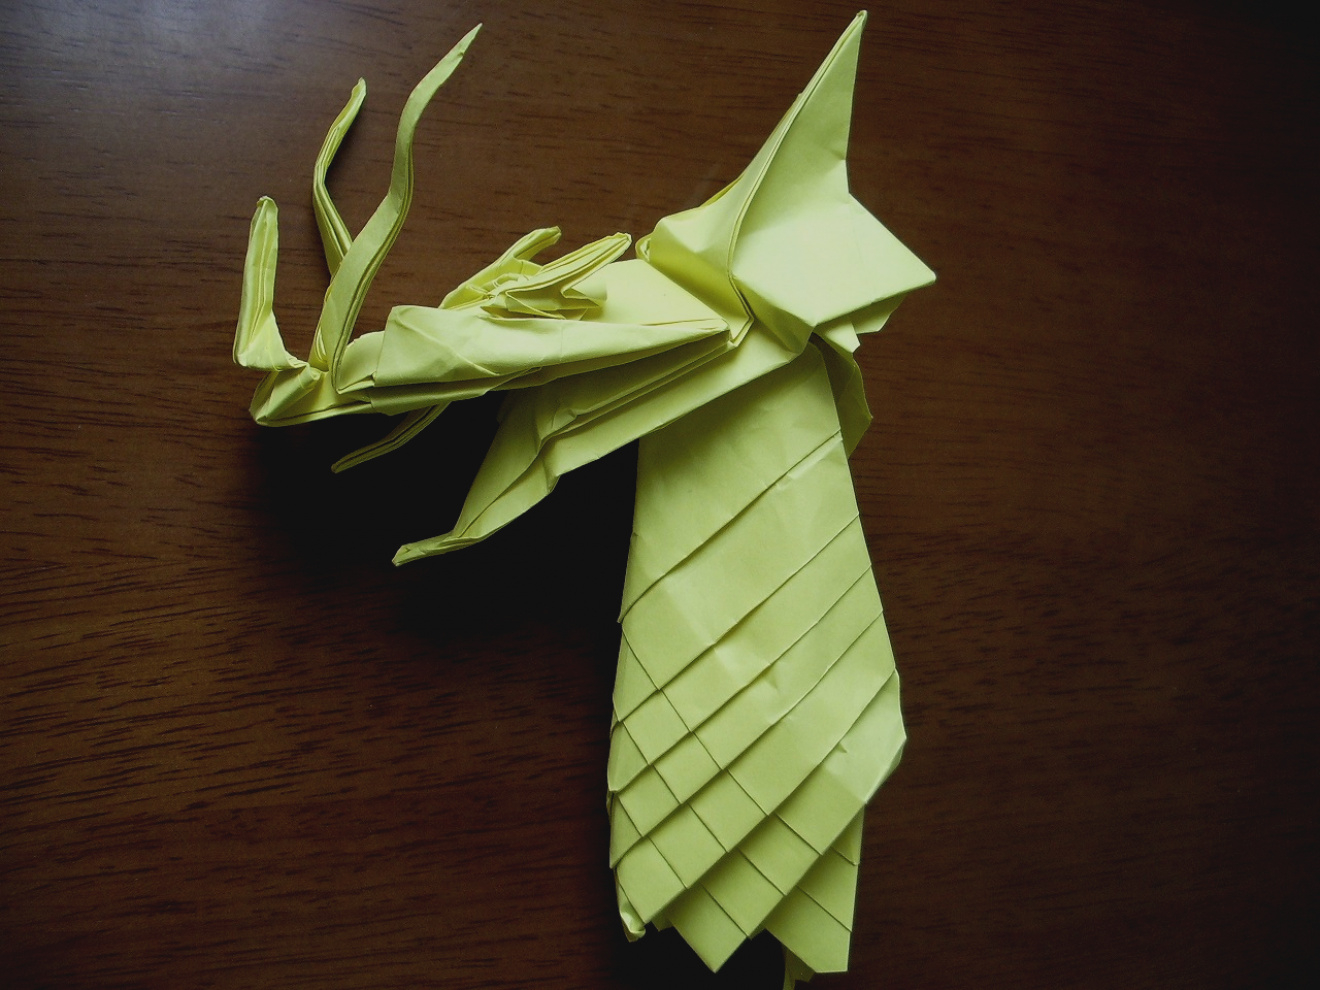 Origami Dragon Head Chinese Page 9 Of 23 Origami And Craft Collections